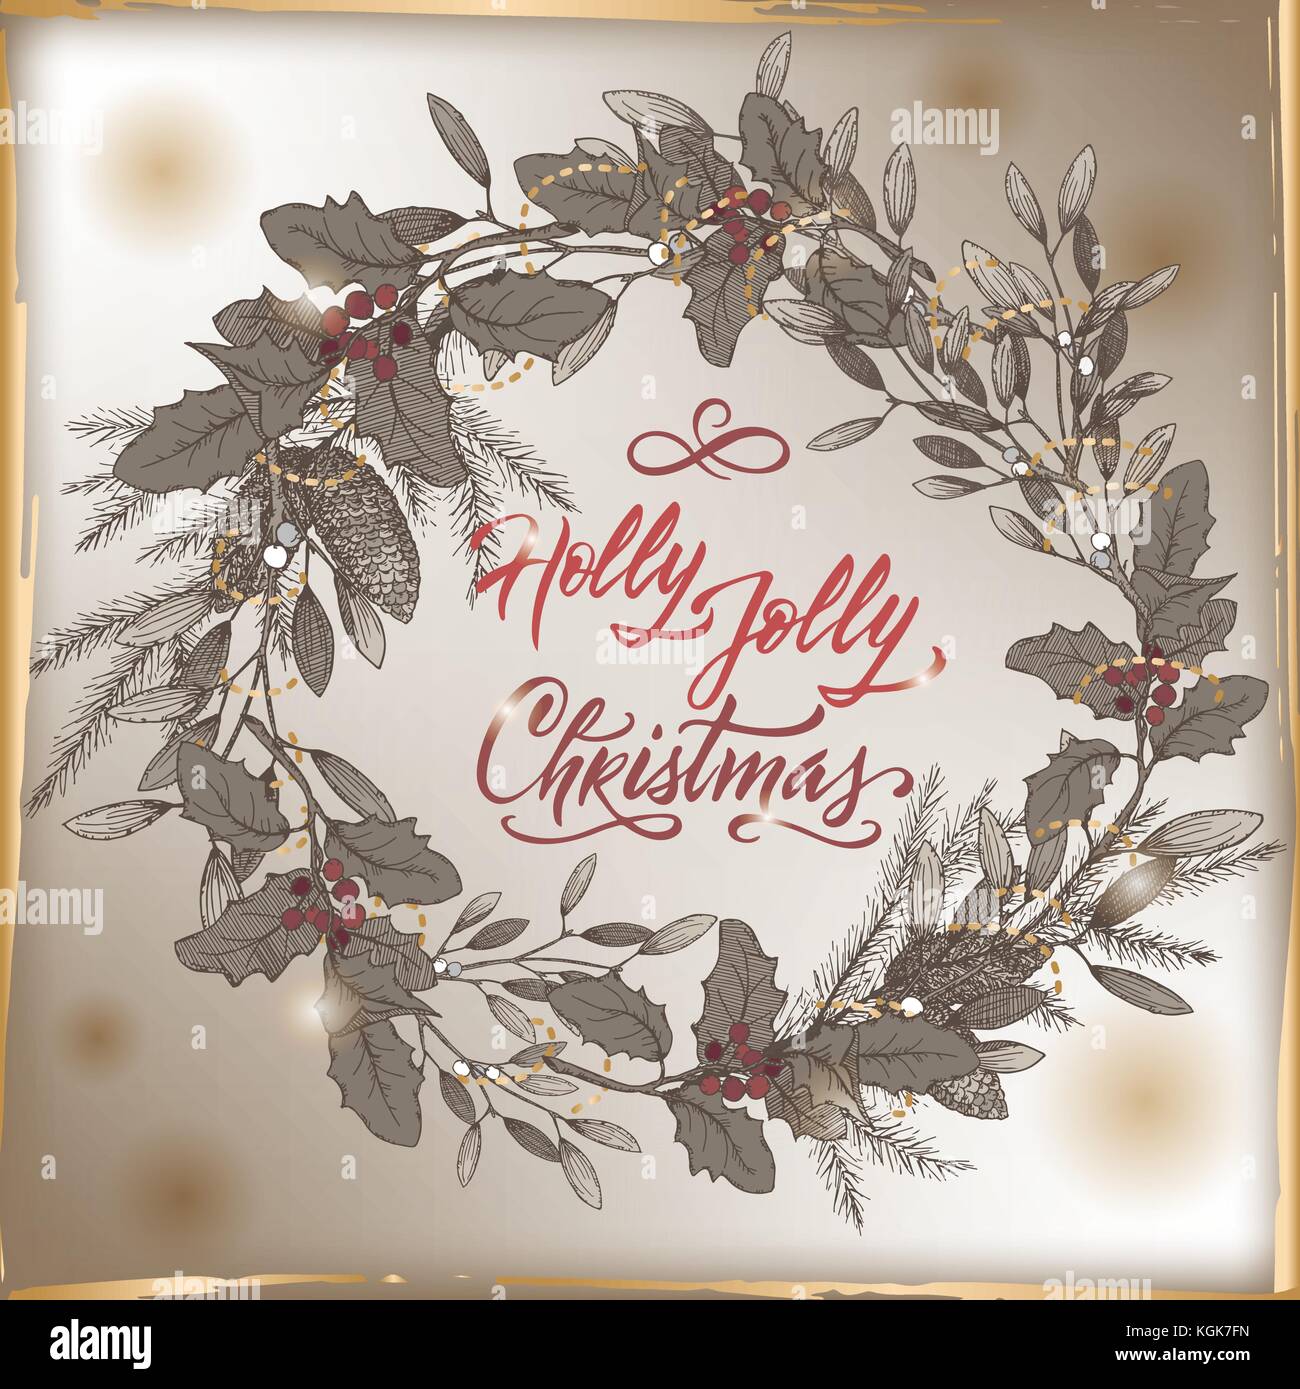 Foto Di Natale Vintage.Vintage Christmas Card With Holly Jolly Brush Lettering Mistletoe Stock Vector Image Art Alamy